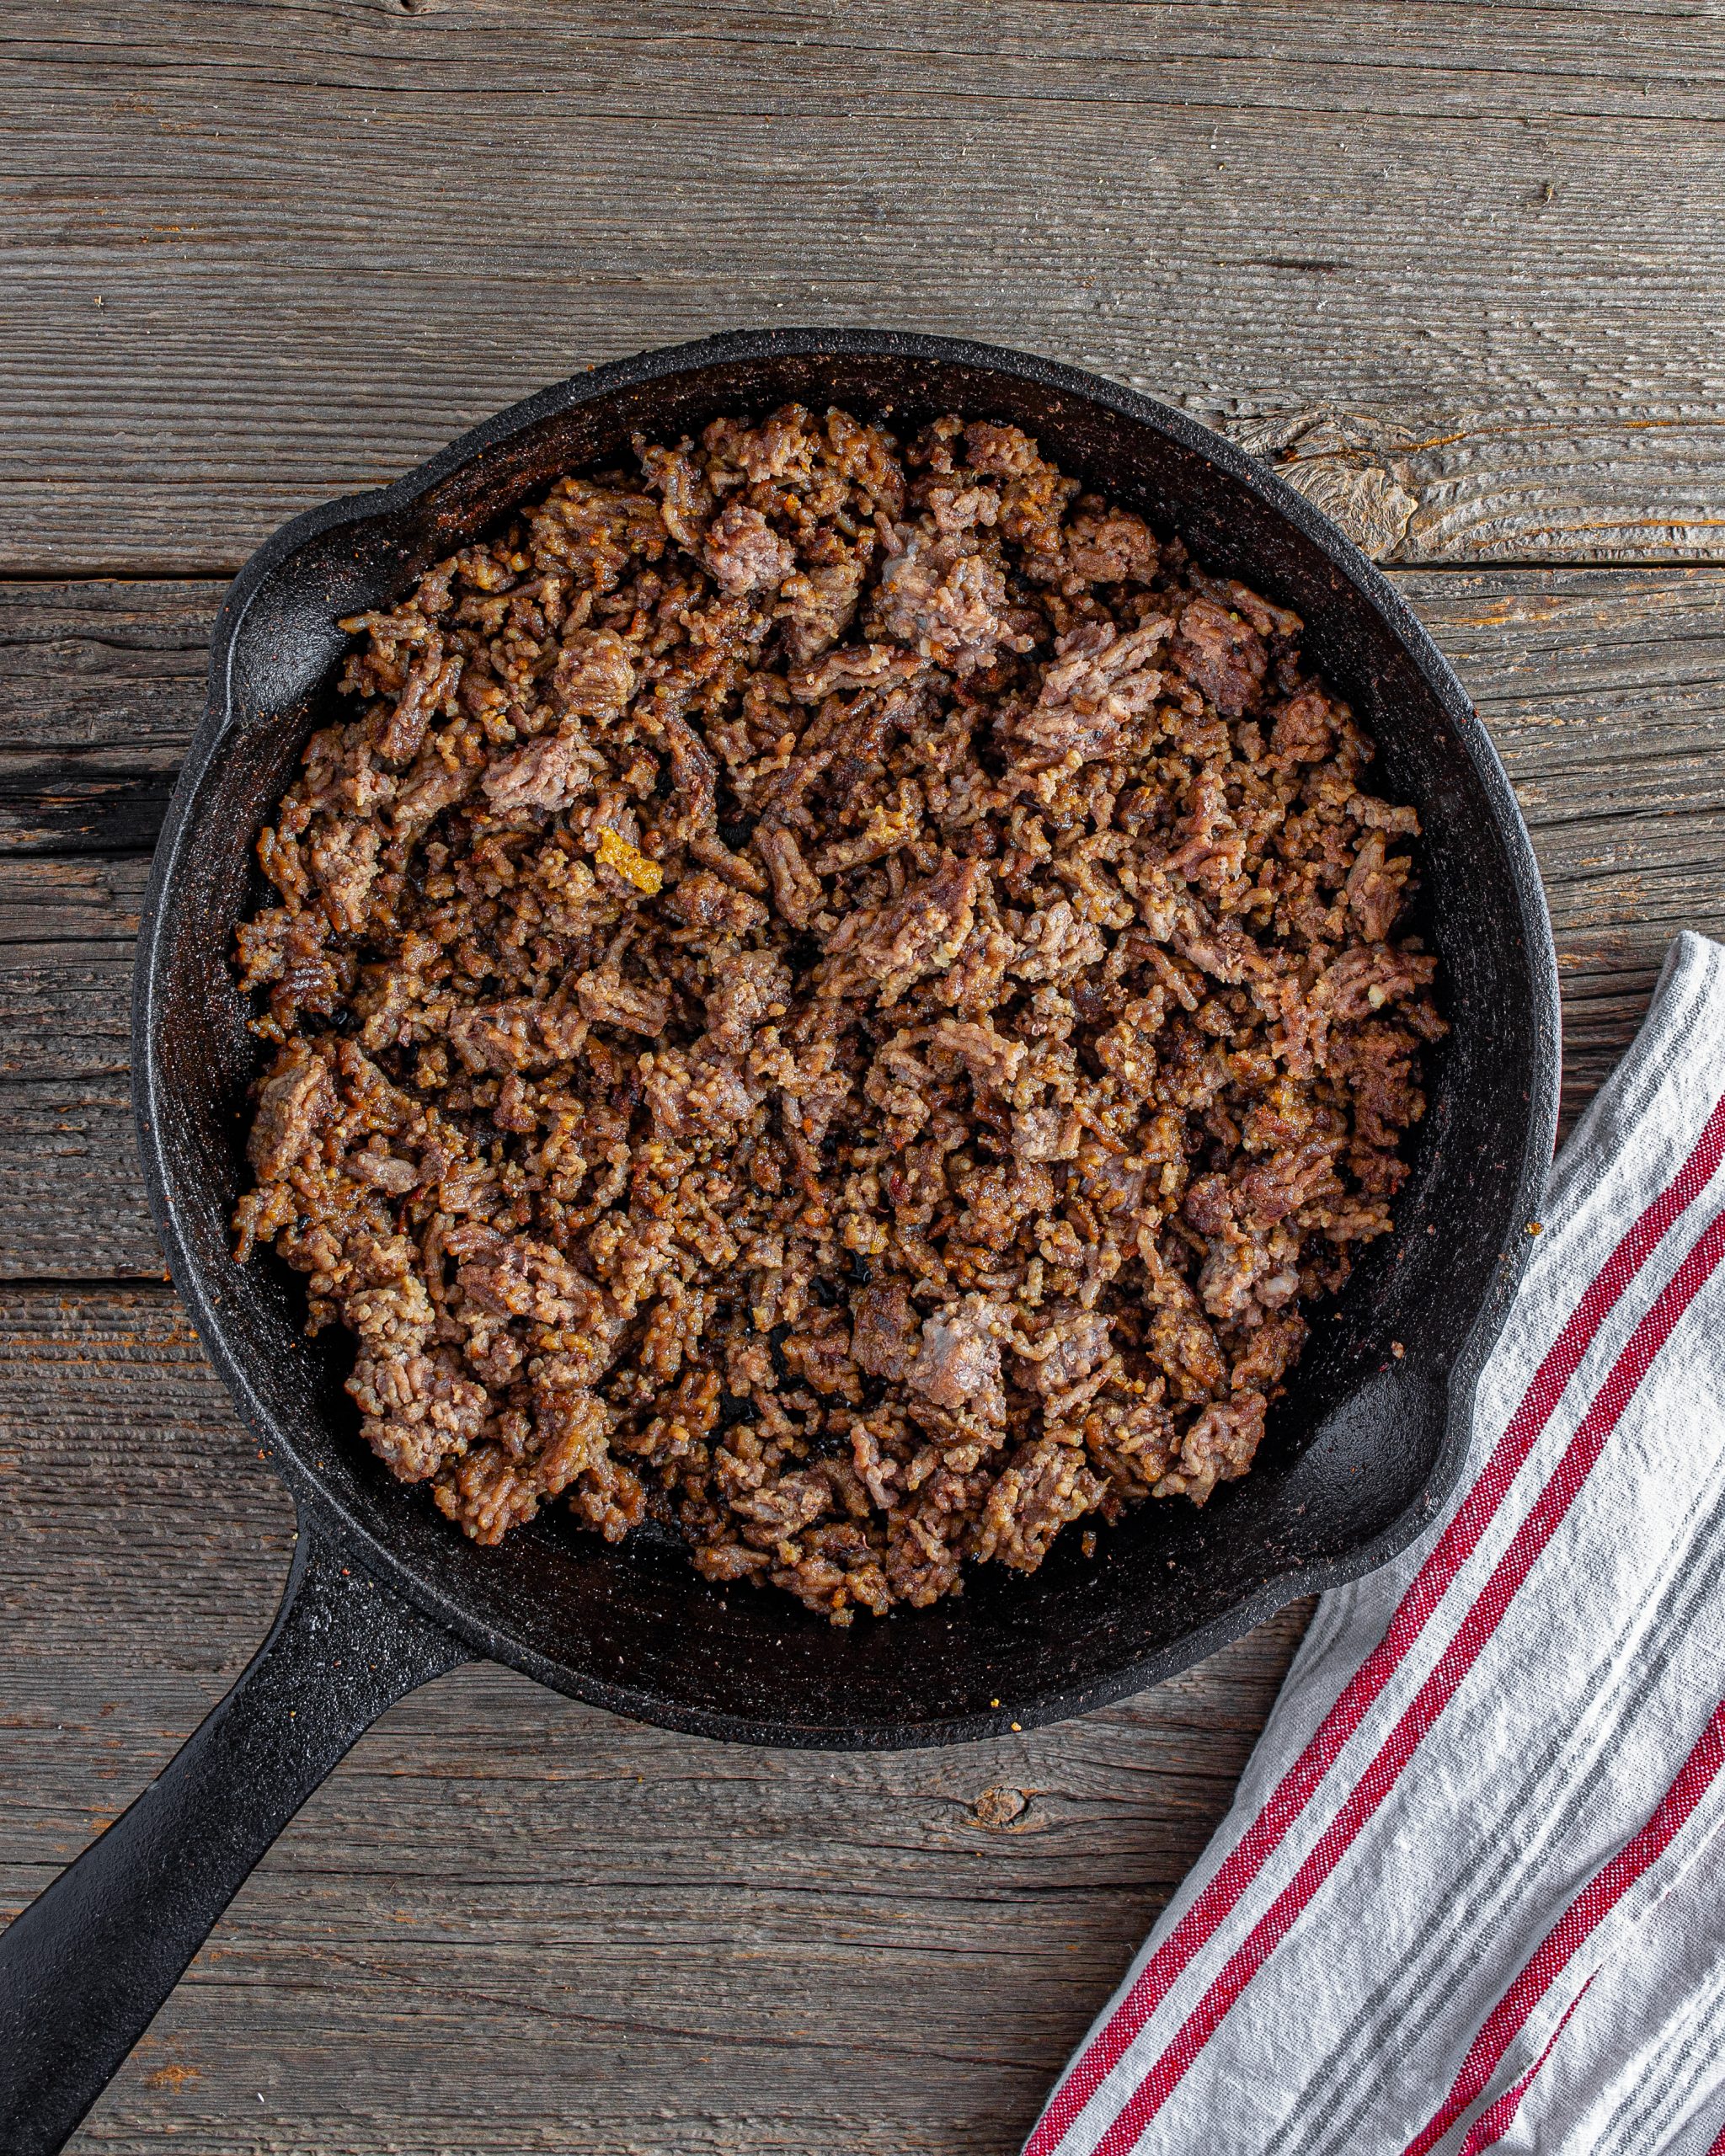 Add the ground beef to a large cast iron skillet and brown until a deep brown crust appears before breaking the beef apart.